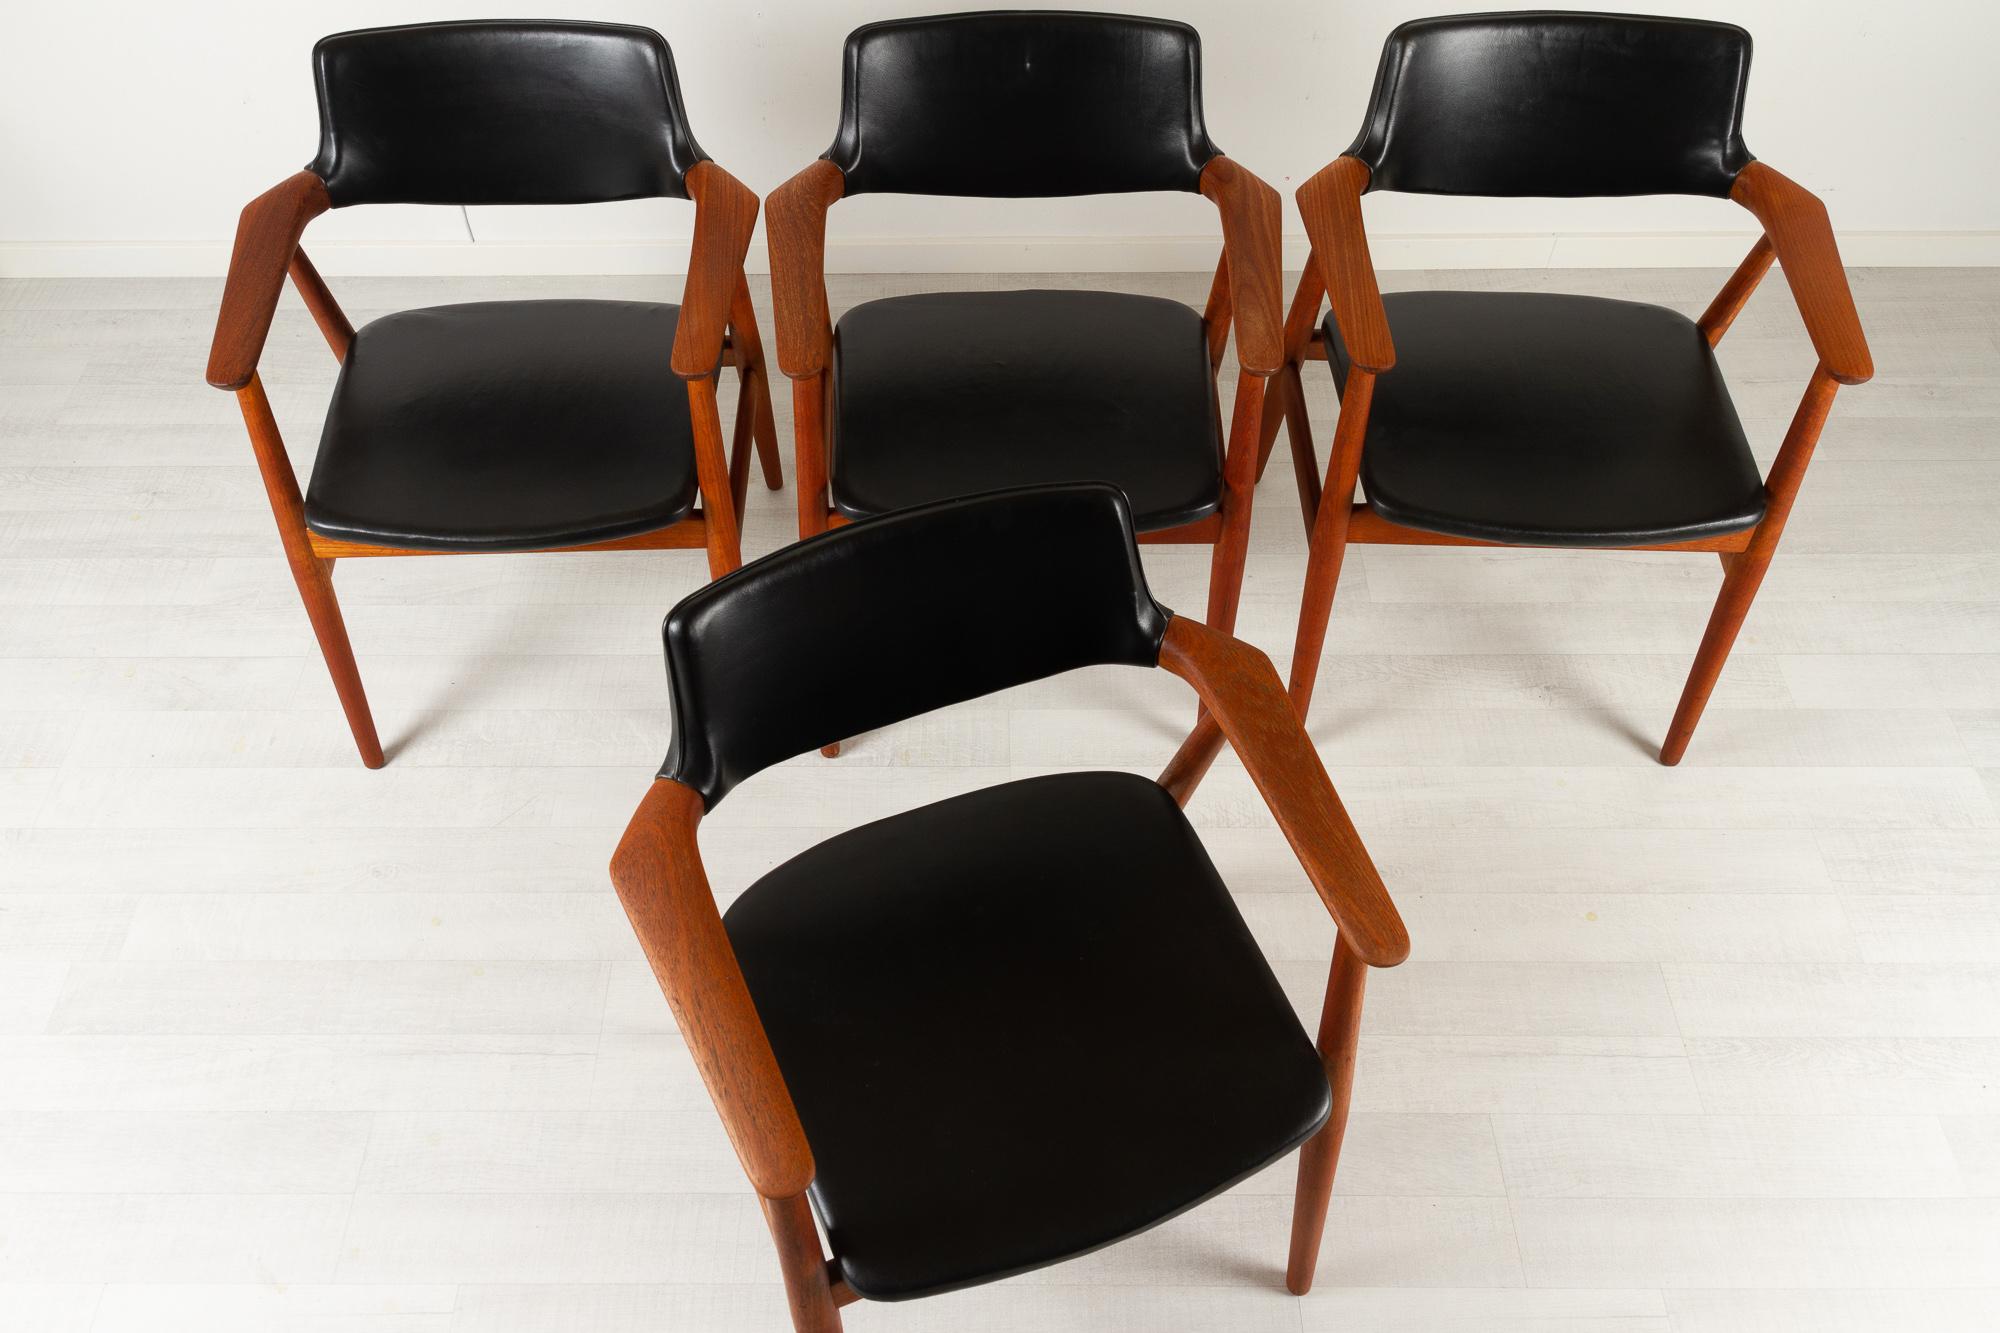 Mid-20th Century Vintage Danish Teak Armchairs GM11 by Svend Aage Eriksen 1960s Set of 4 For Sale